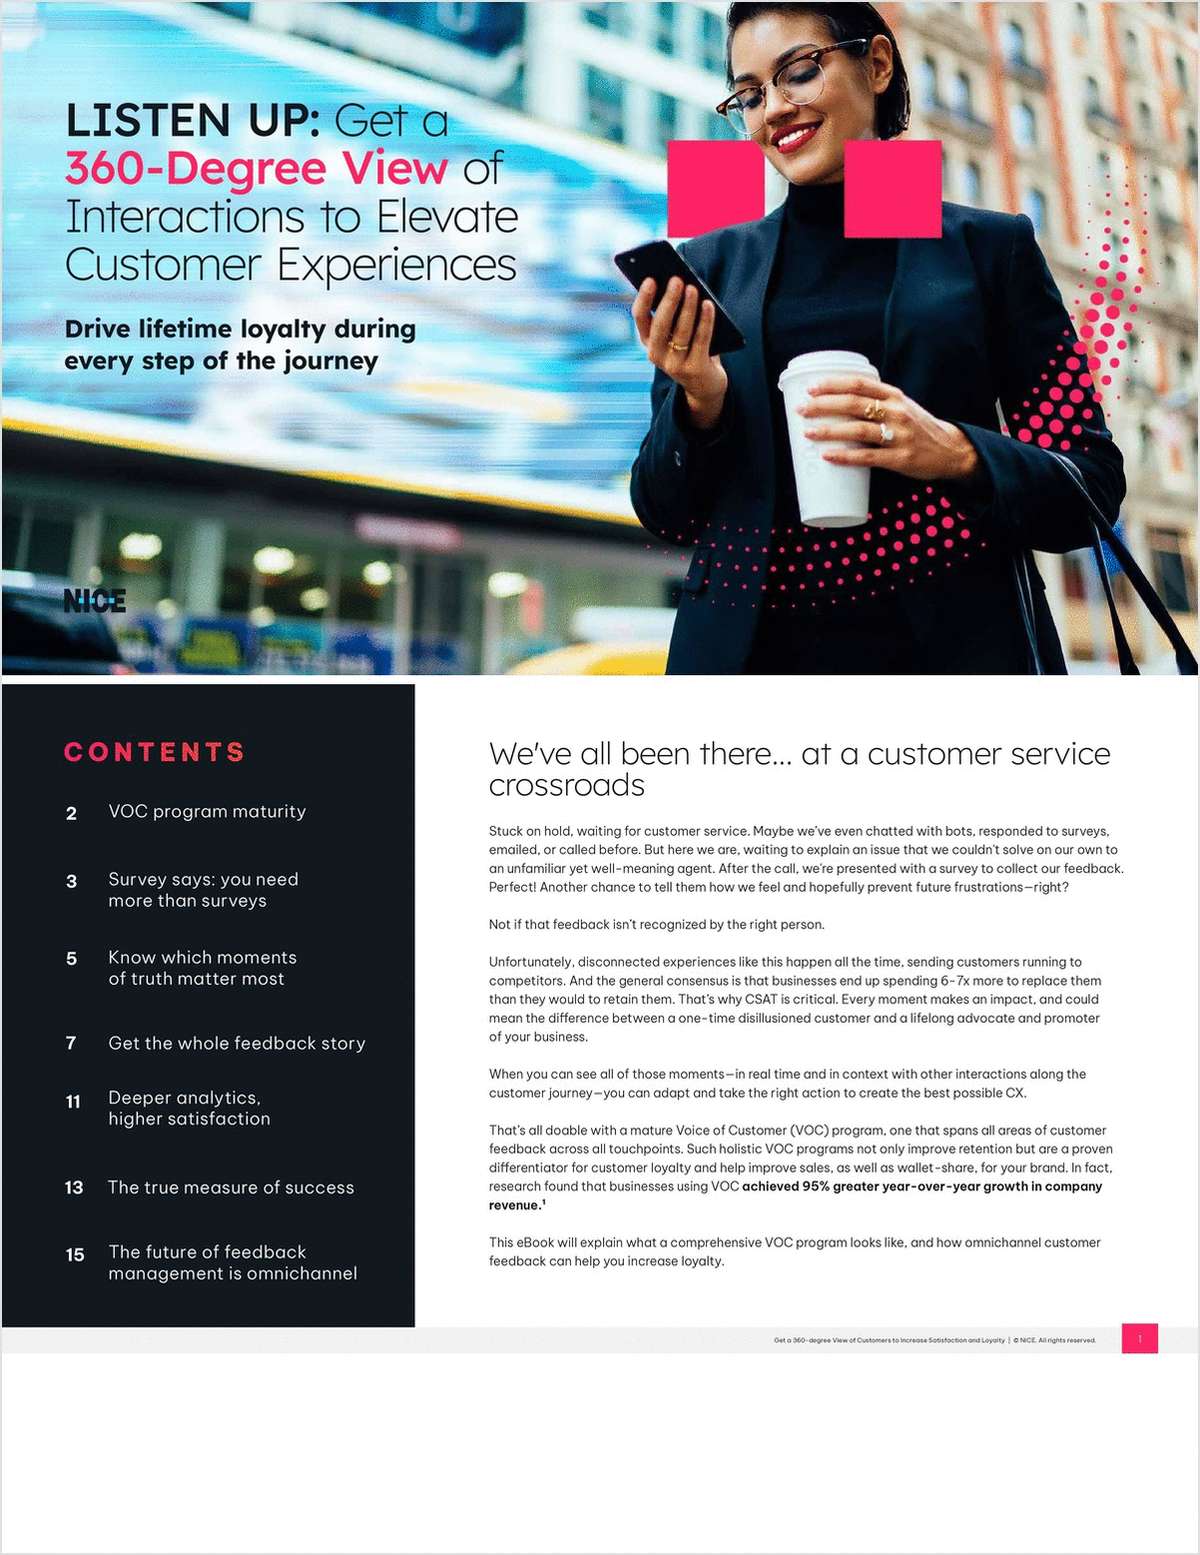 LISTEN UP: Get a 360-Degree View of Interactions to Elevate Customer Experiences